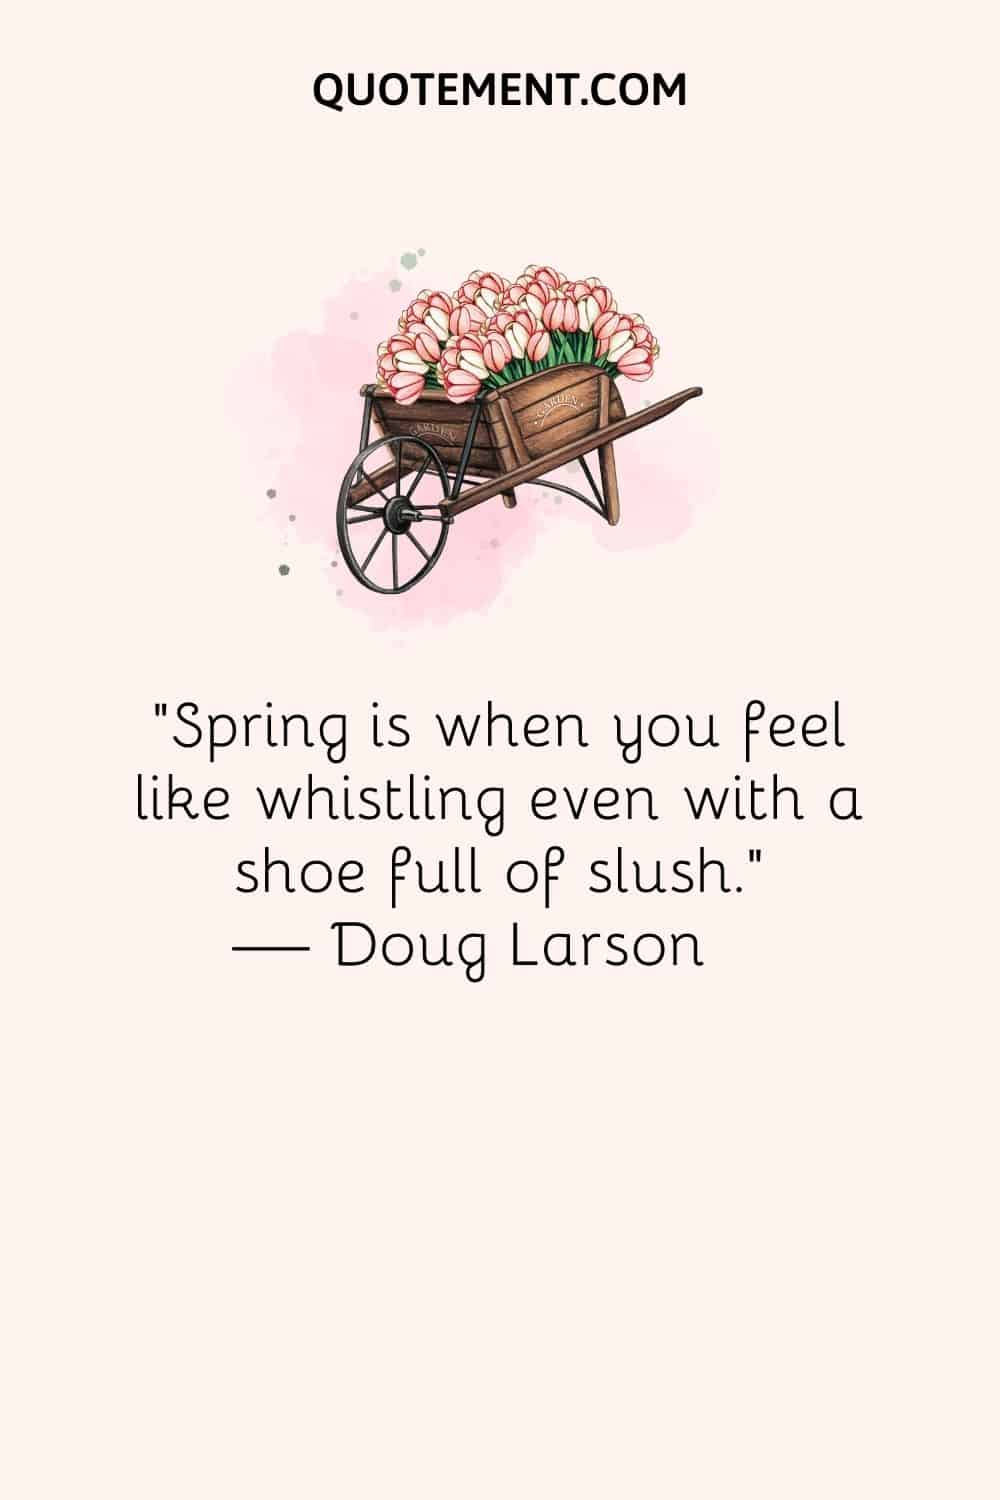 Spring is when you feel like whistling even with a shoe full of slush